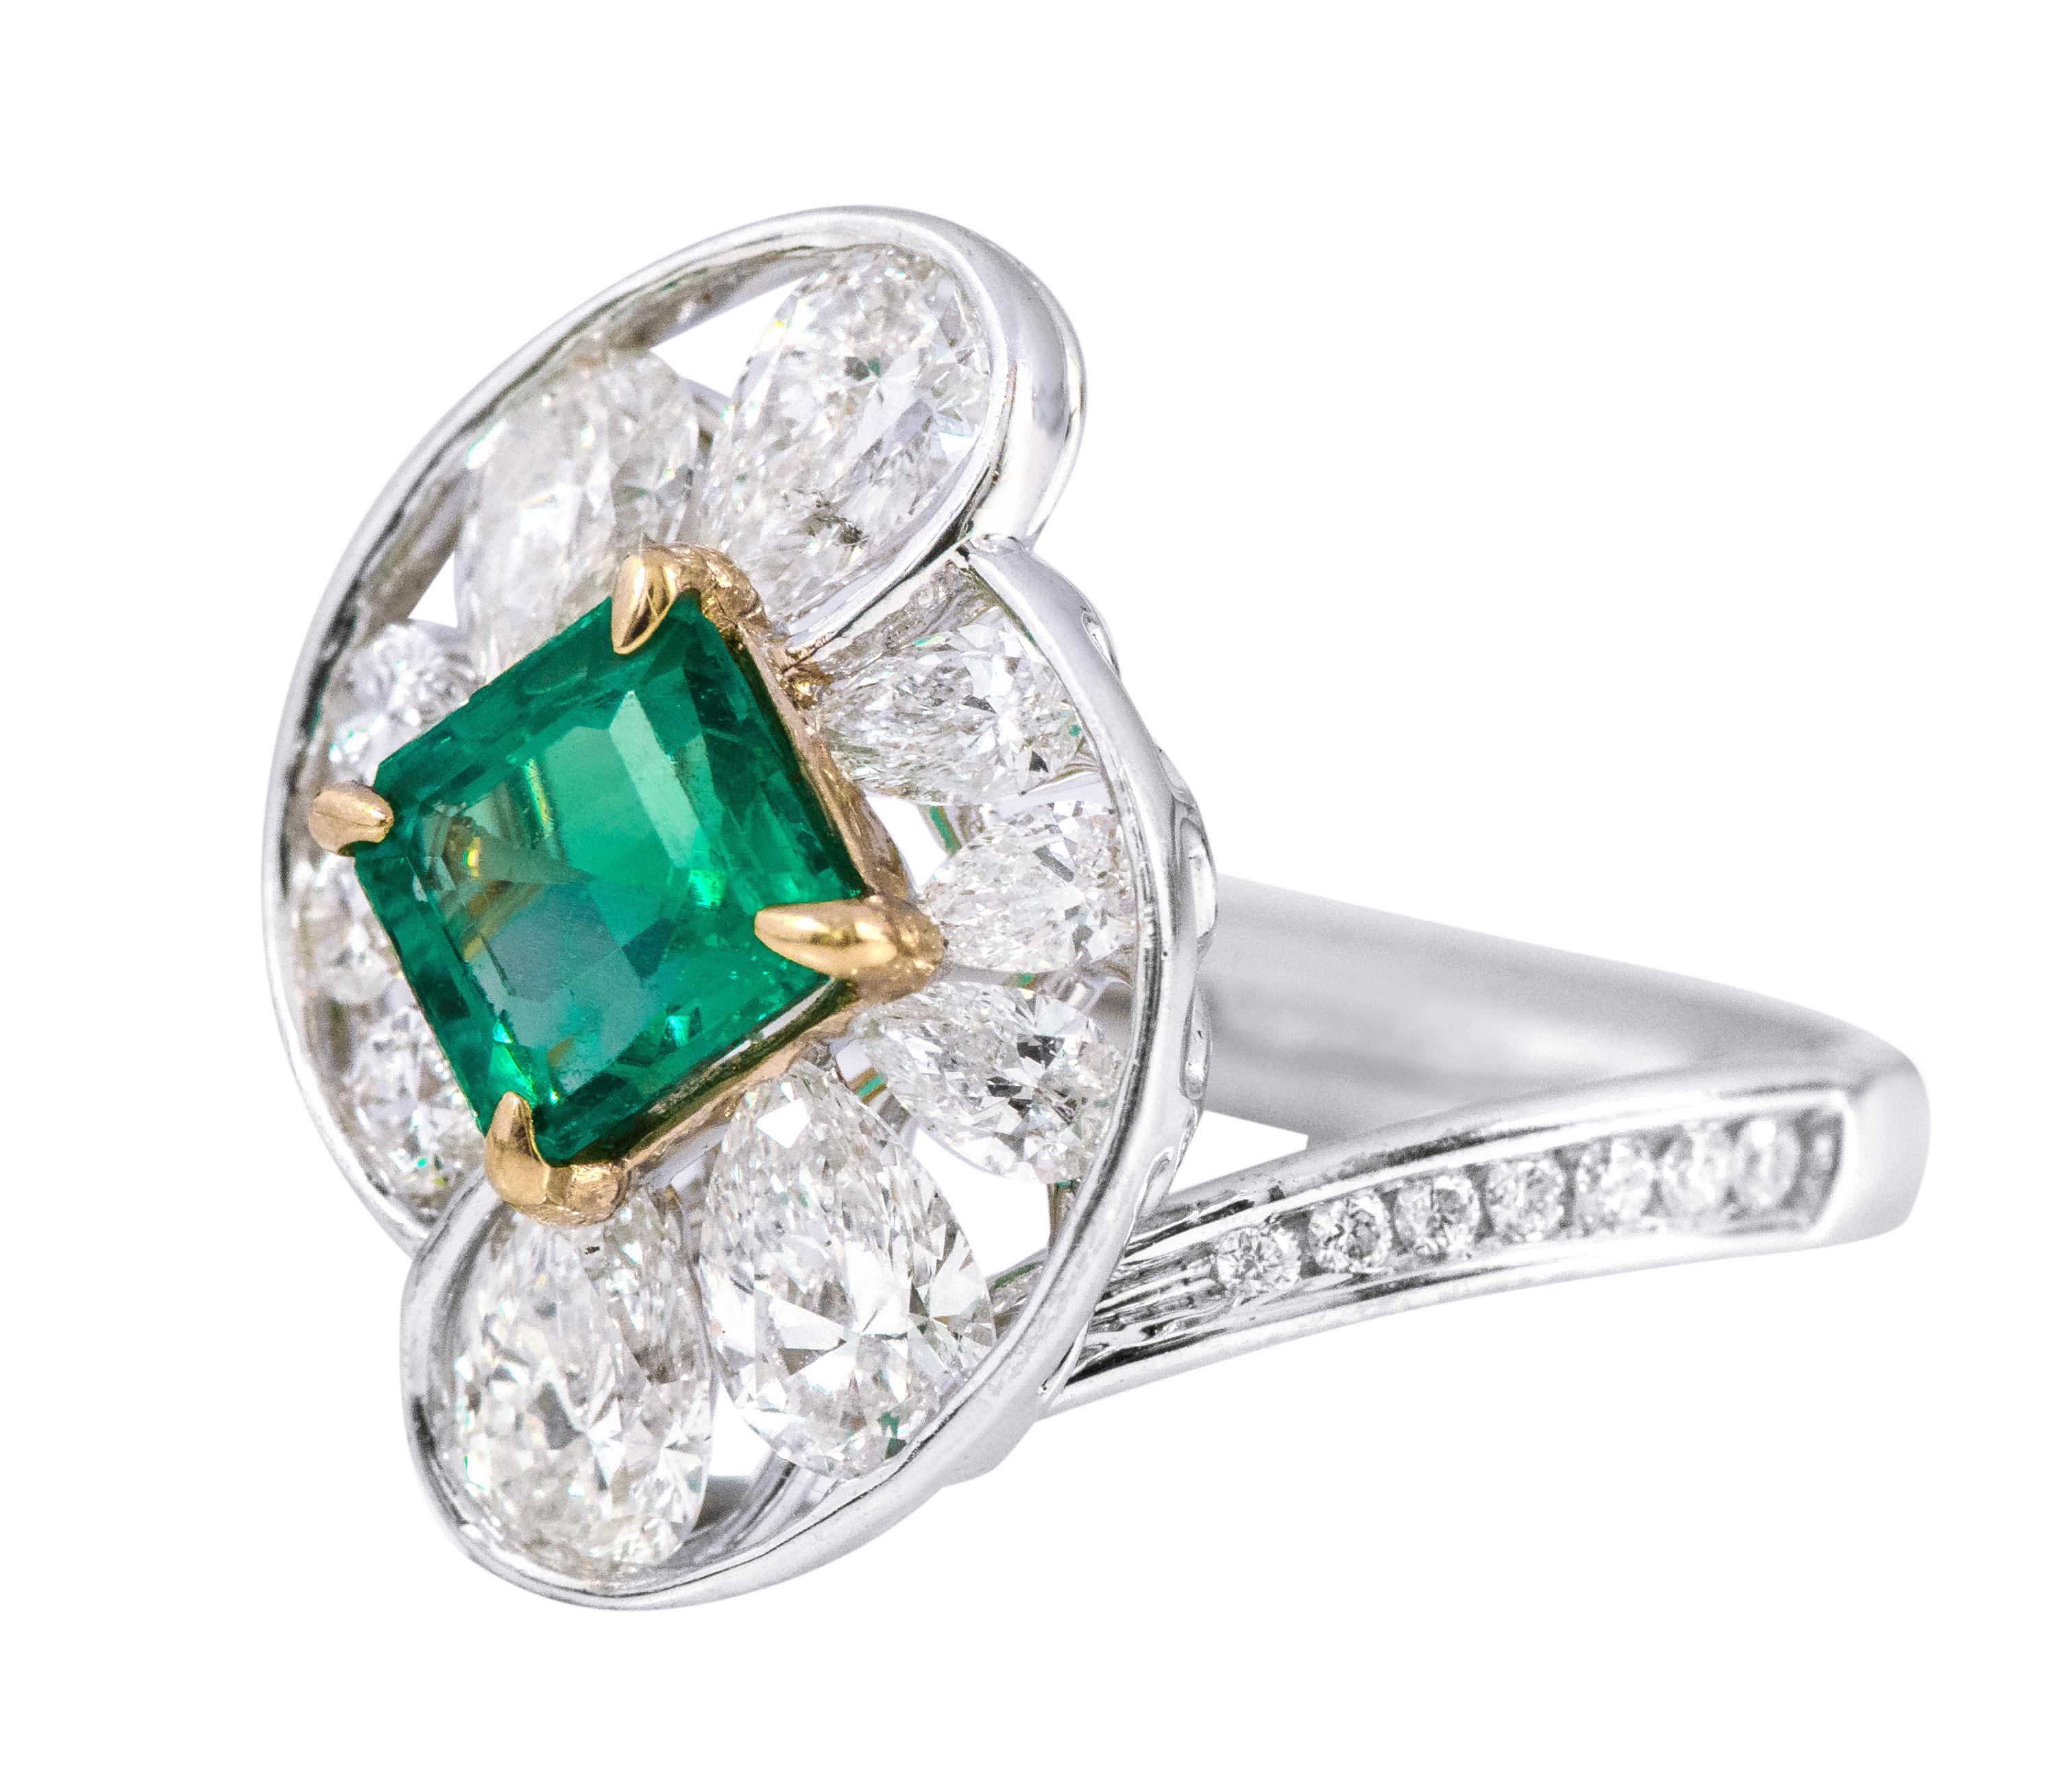 18 Karat White Gold 1.10 Carat Natural Emerald and Diamond Cluster Cocktail Ring

This exemplary parakeet lush green emerald and diamond ring is mesmerizing. The leveled-up solitaire perfect square emerald in the center in eagle prong setting is